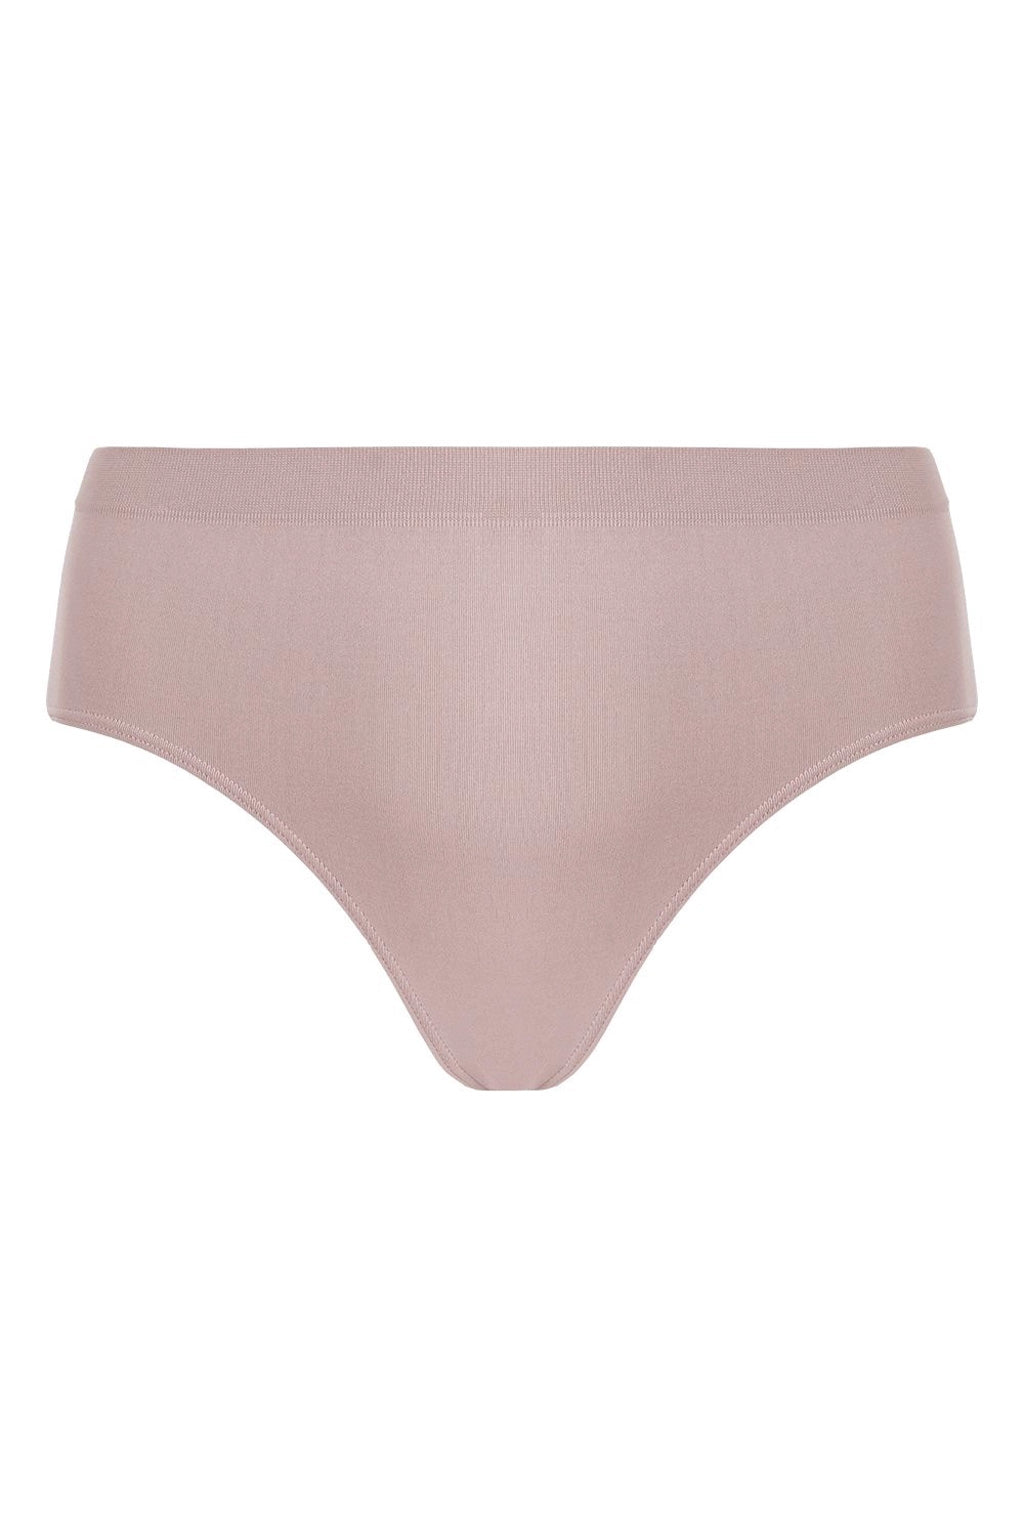 Plie Control Double Thread Body Shaping G-String Panties